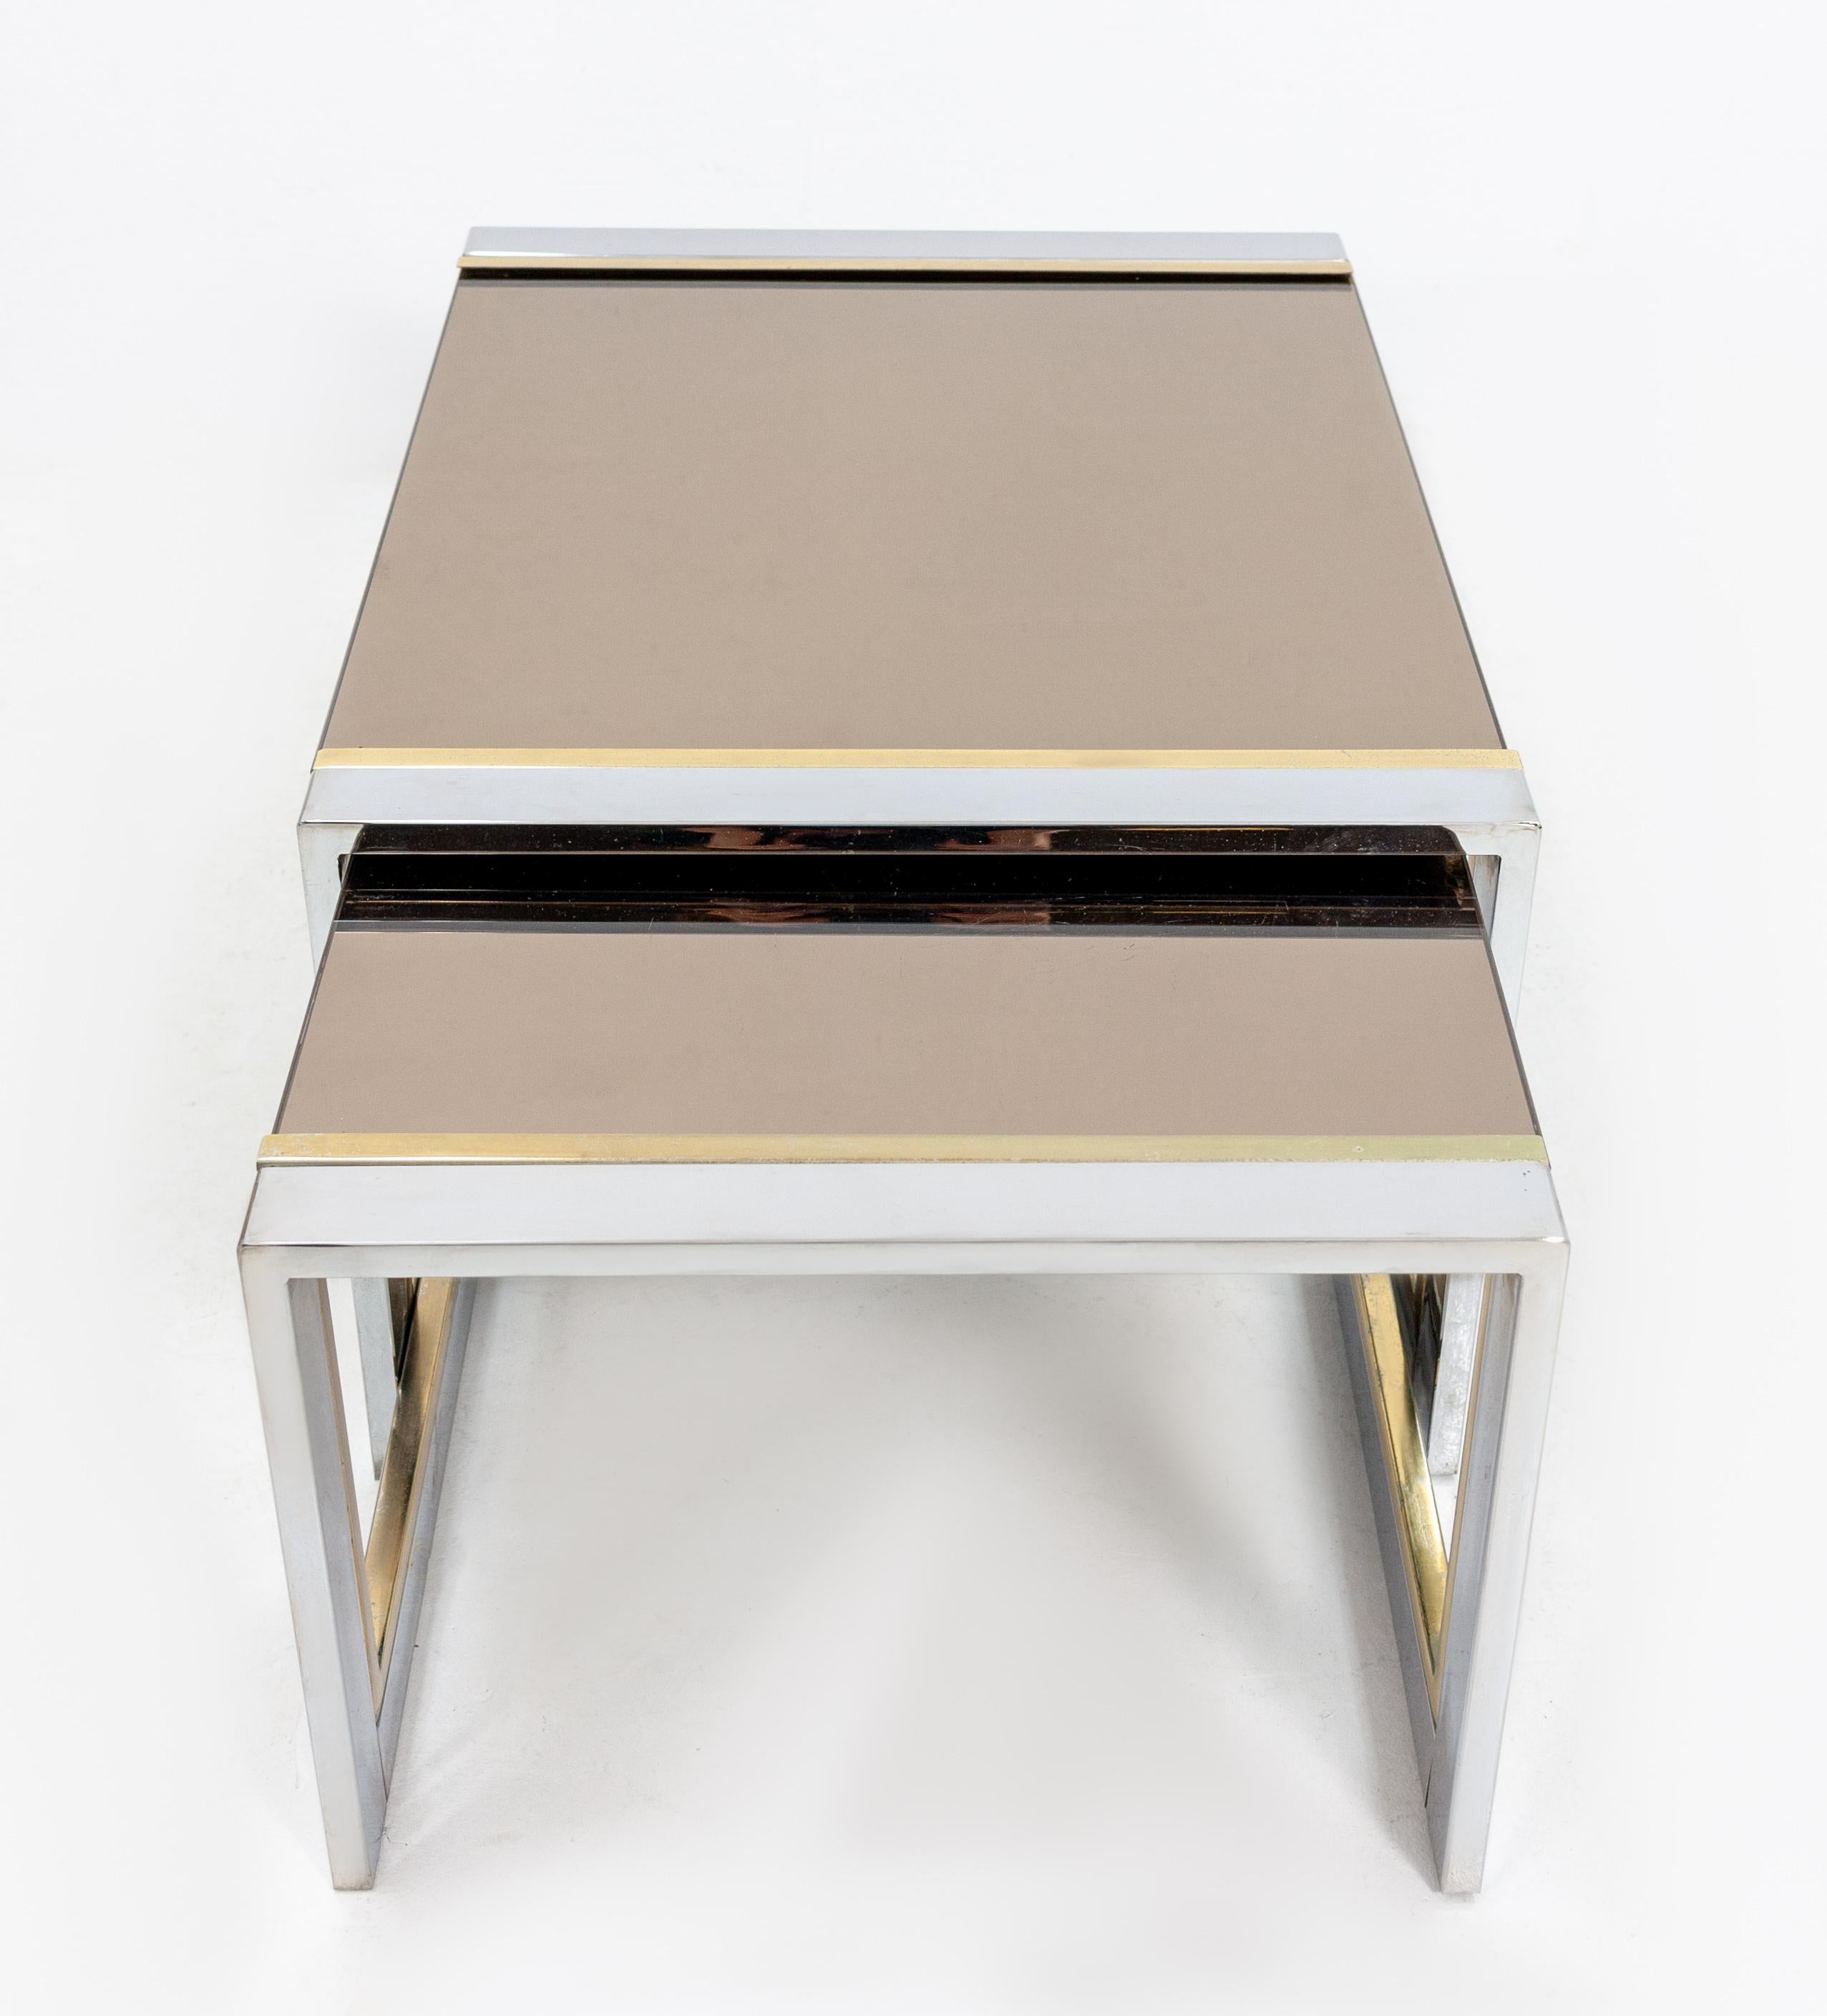 Lovely design by Willy Rizzo Italian designer. 1970s, two side tables. Made off polished steel and brass,
With the original smoked mirror glass. Very stylish tables. Good condition.
 Large table height 33 cm, width 59 cm, depth 46 cm
 Small table